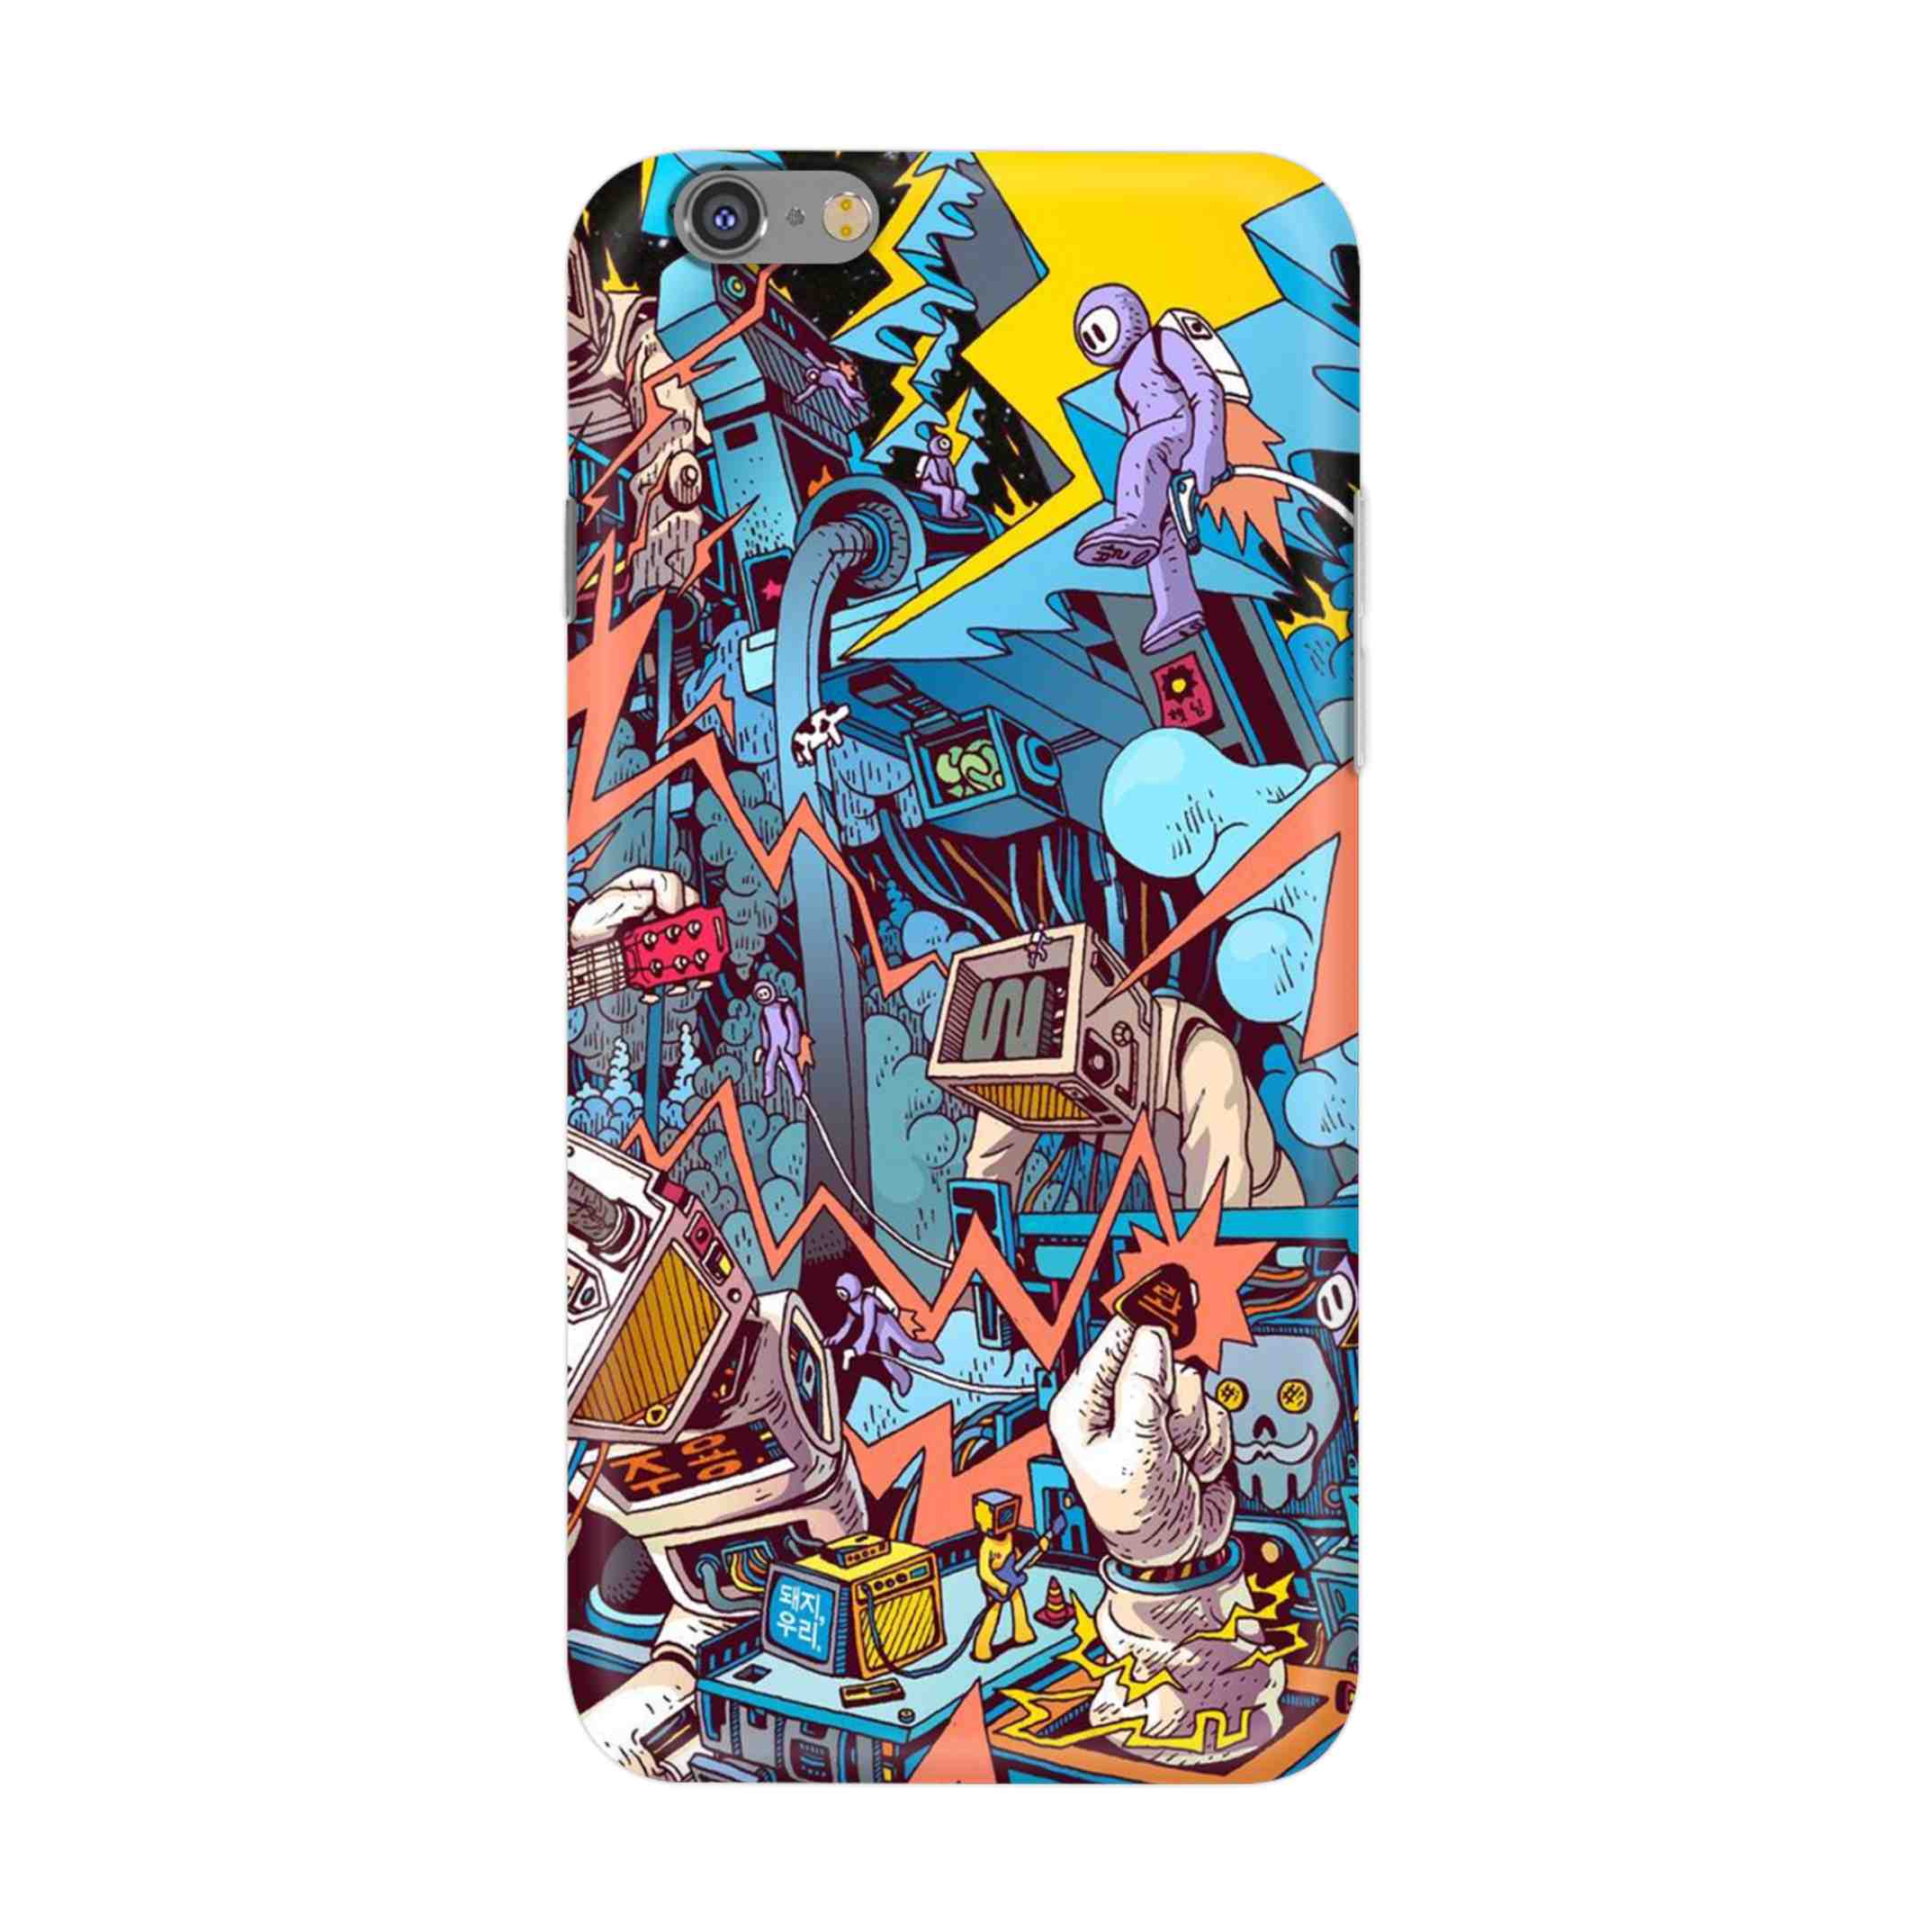 Buy Ofo Panic Hard Back Mobile Phone Case/Cover For iPhone 6 Plus / 6s Plus Online